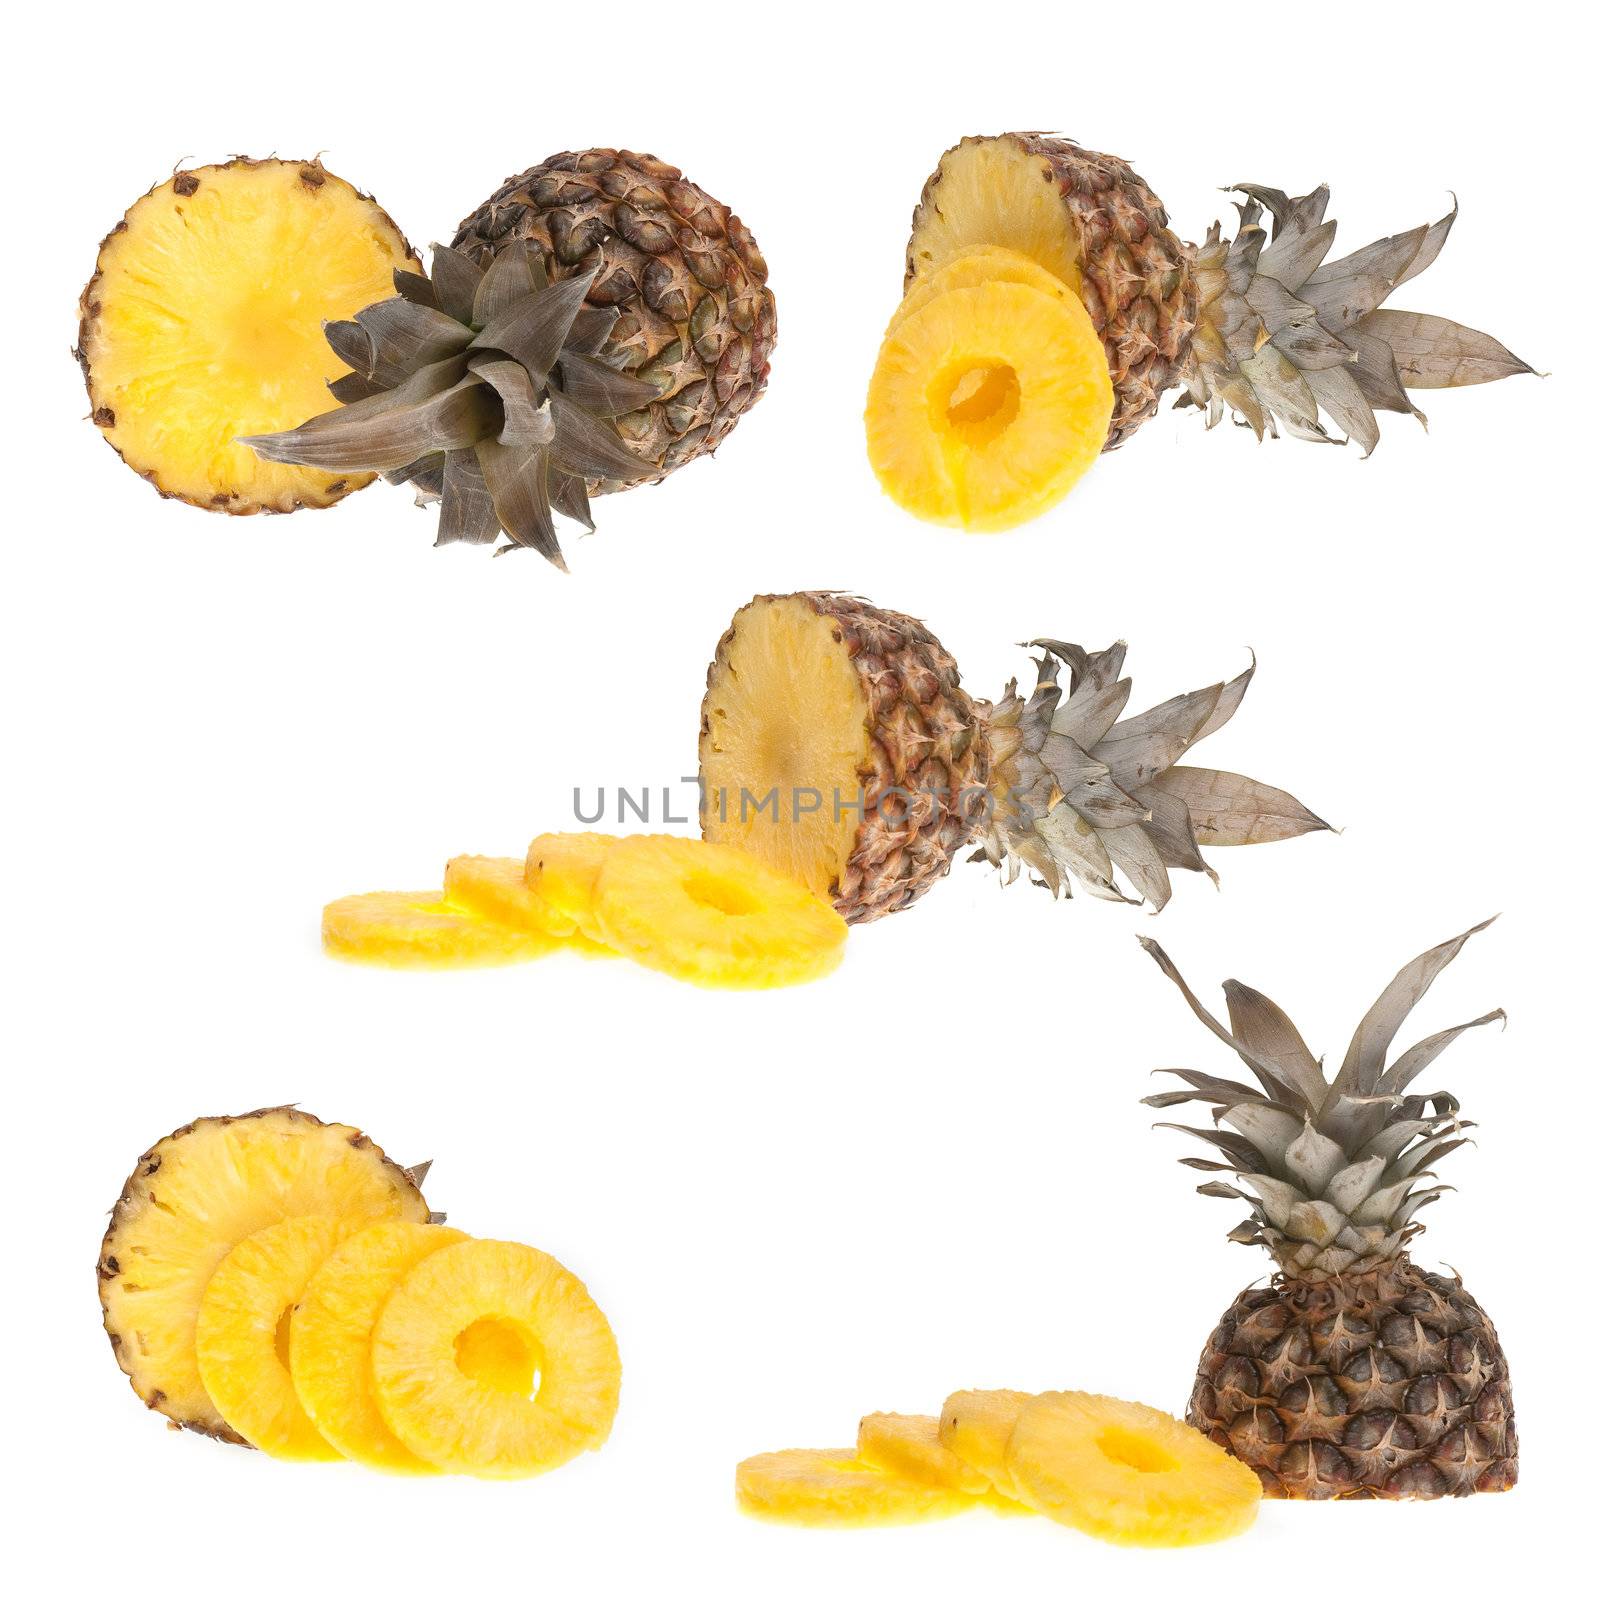 Whole and half pinapple detail isolated on white background.